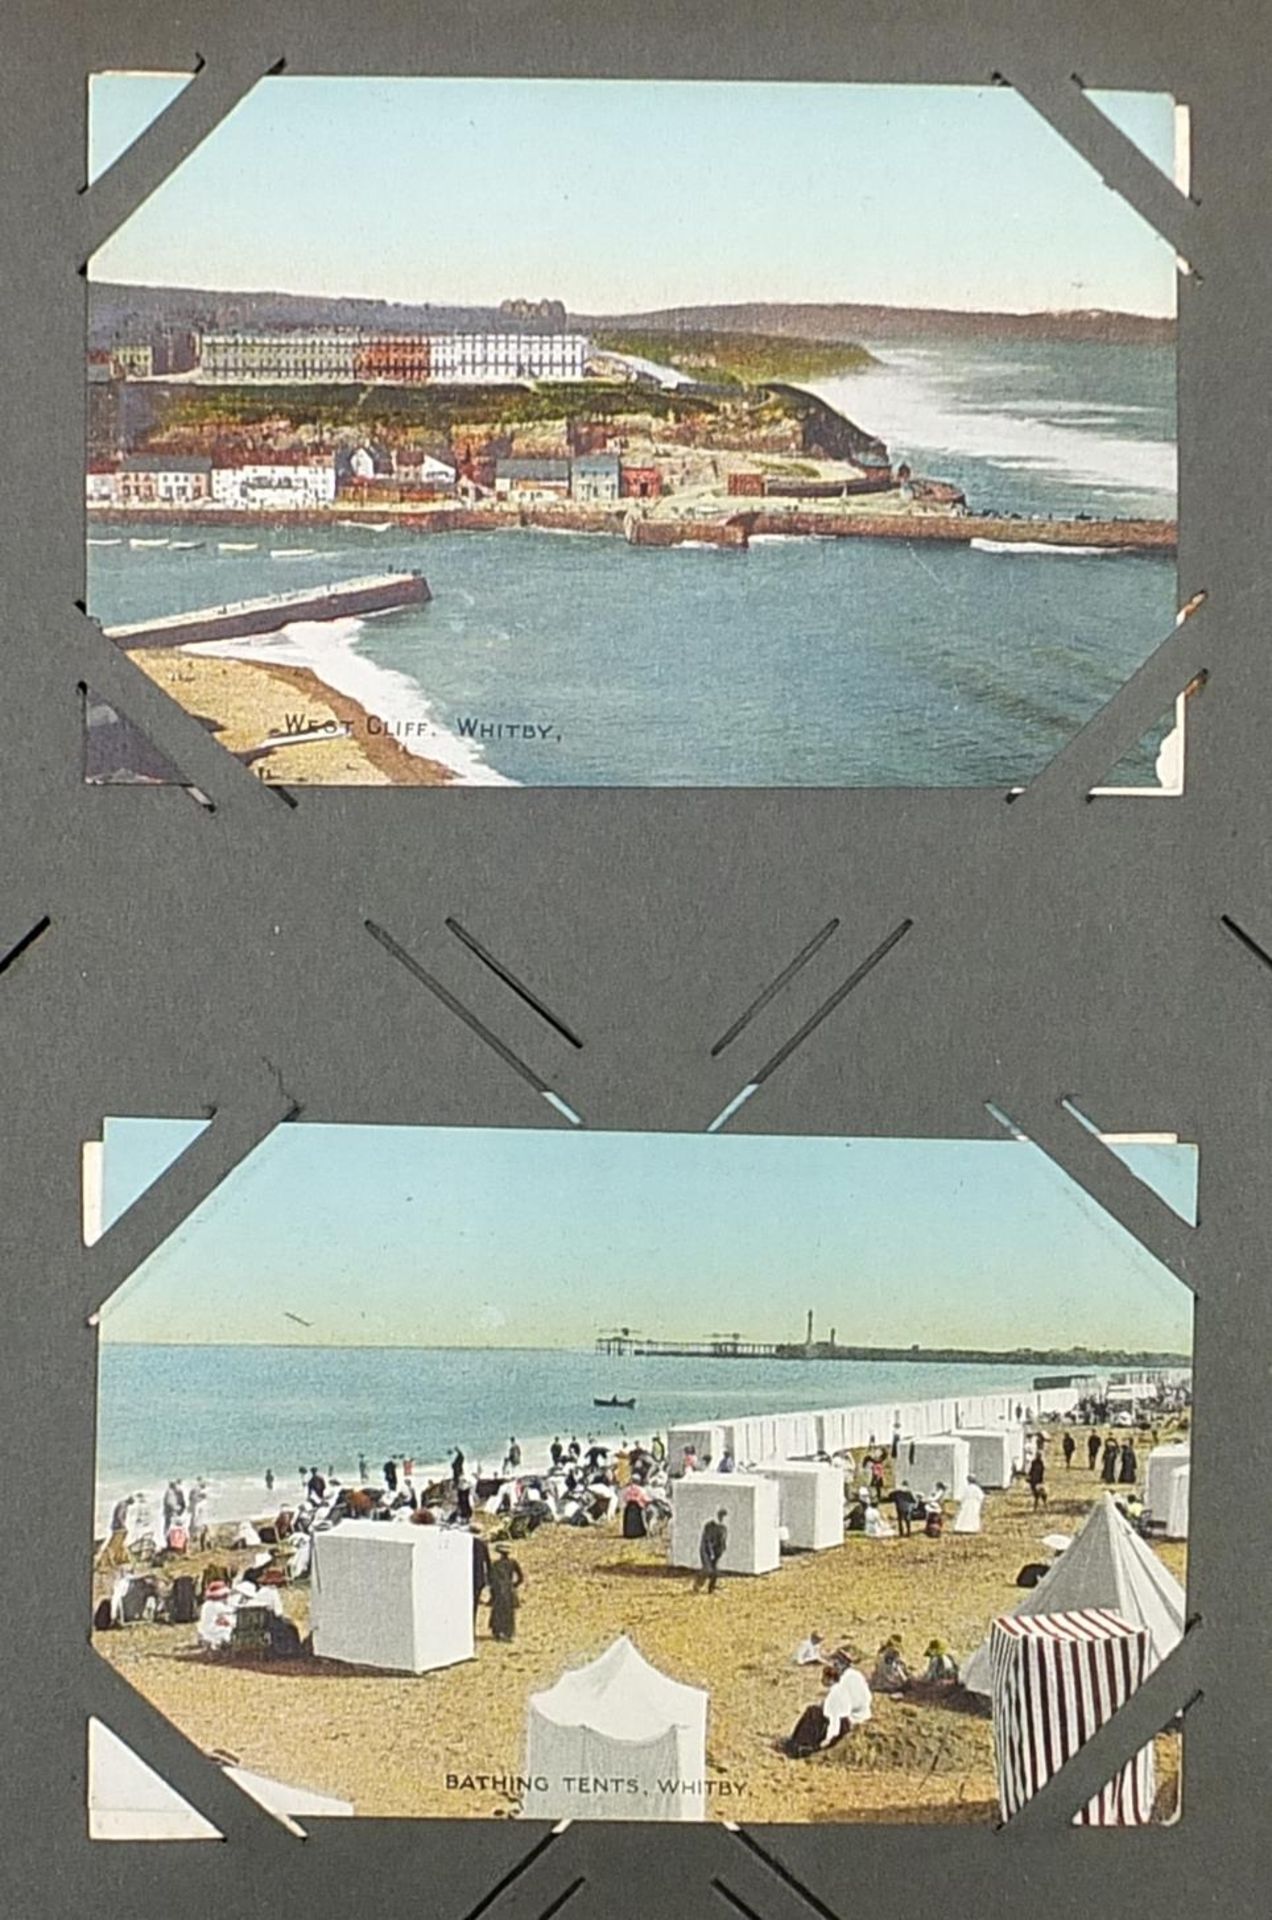 Topographical and Naval interest postcards arranged in an album, some photographic including ships